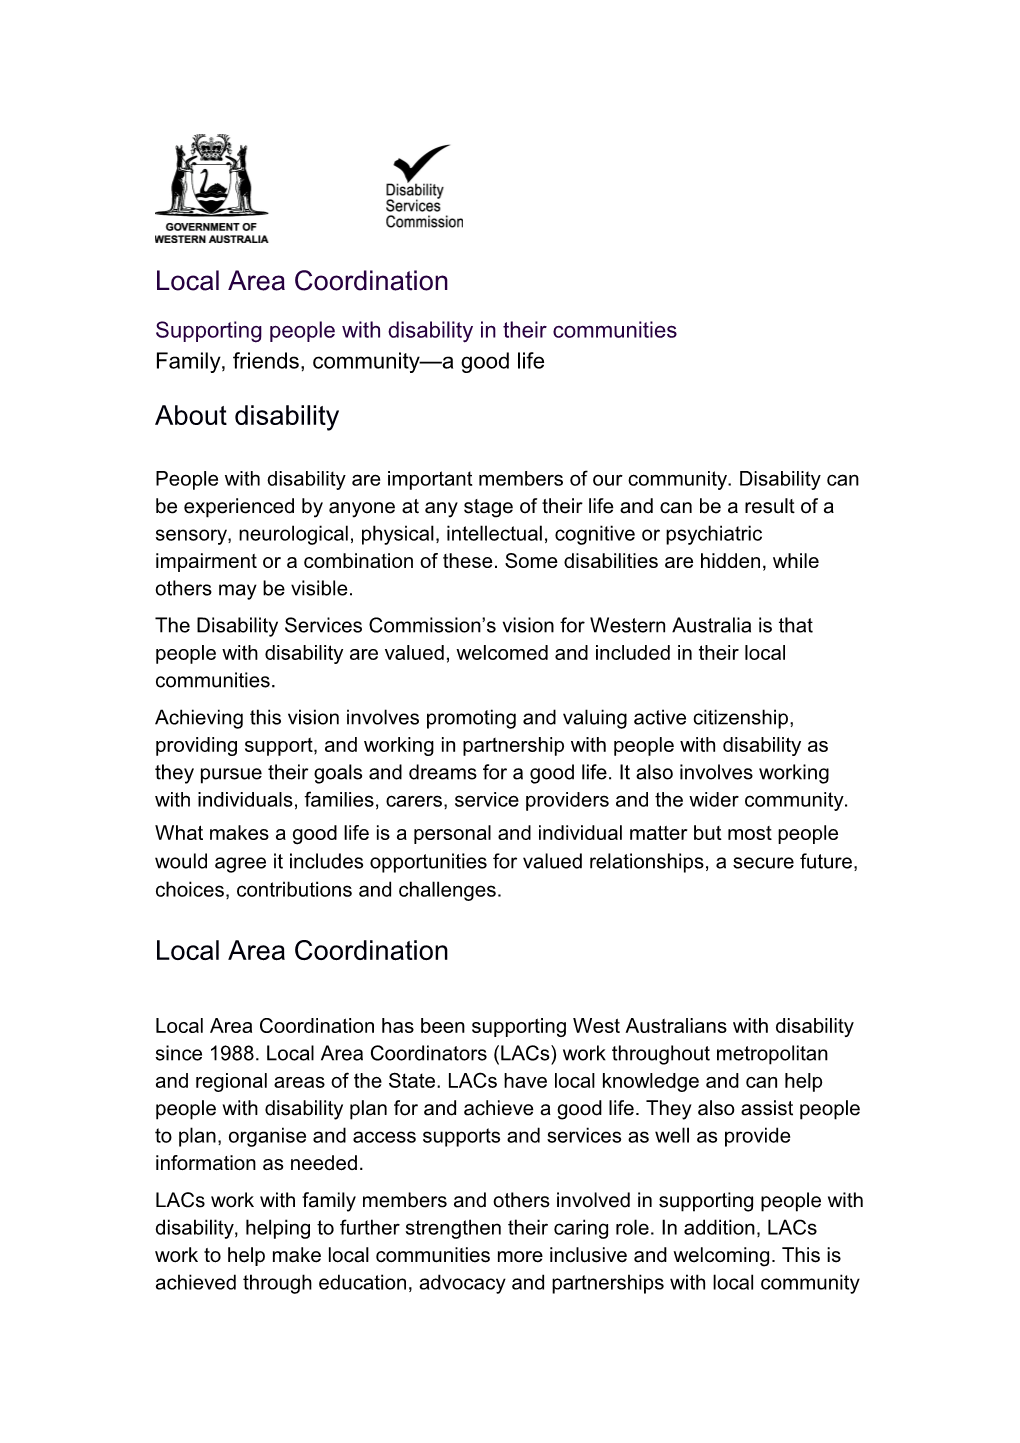 Local Area Coordination: Supporting People with Disability in Their Communities - Booklet